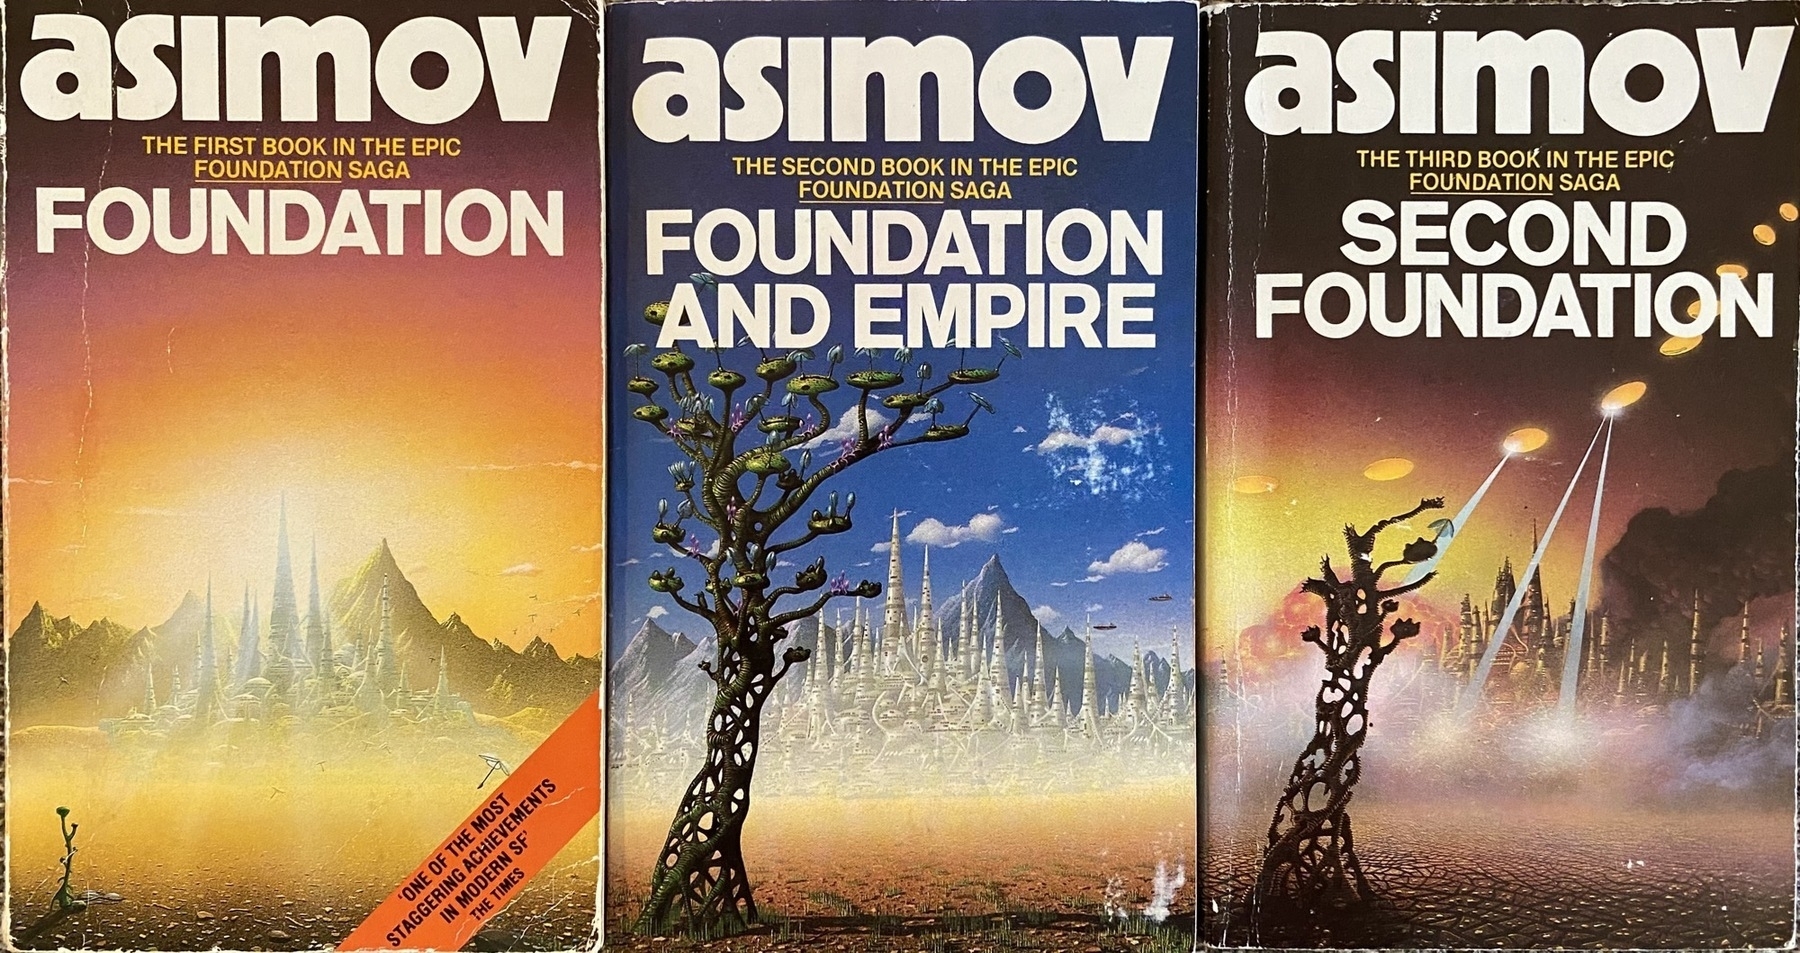 Foundation book covers